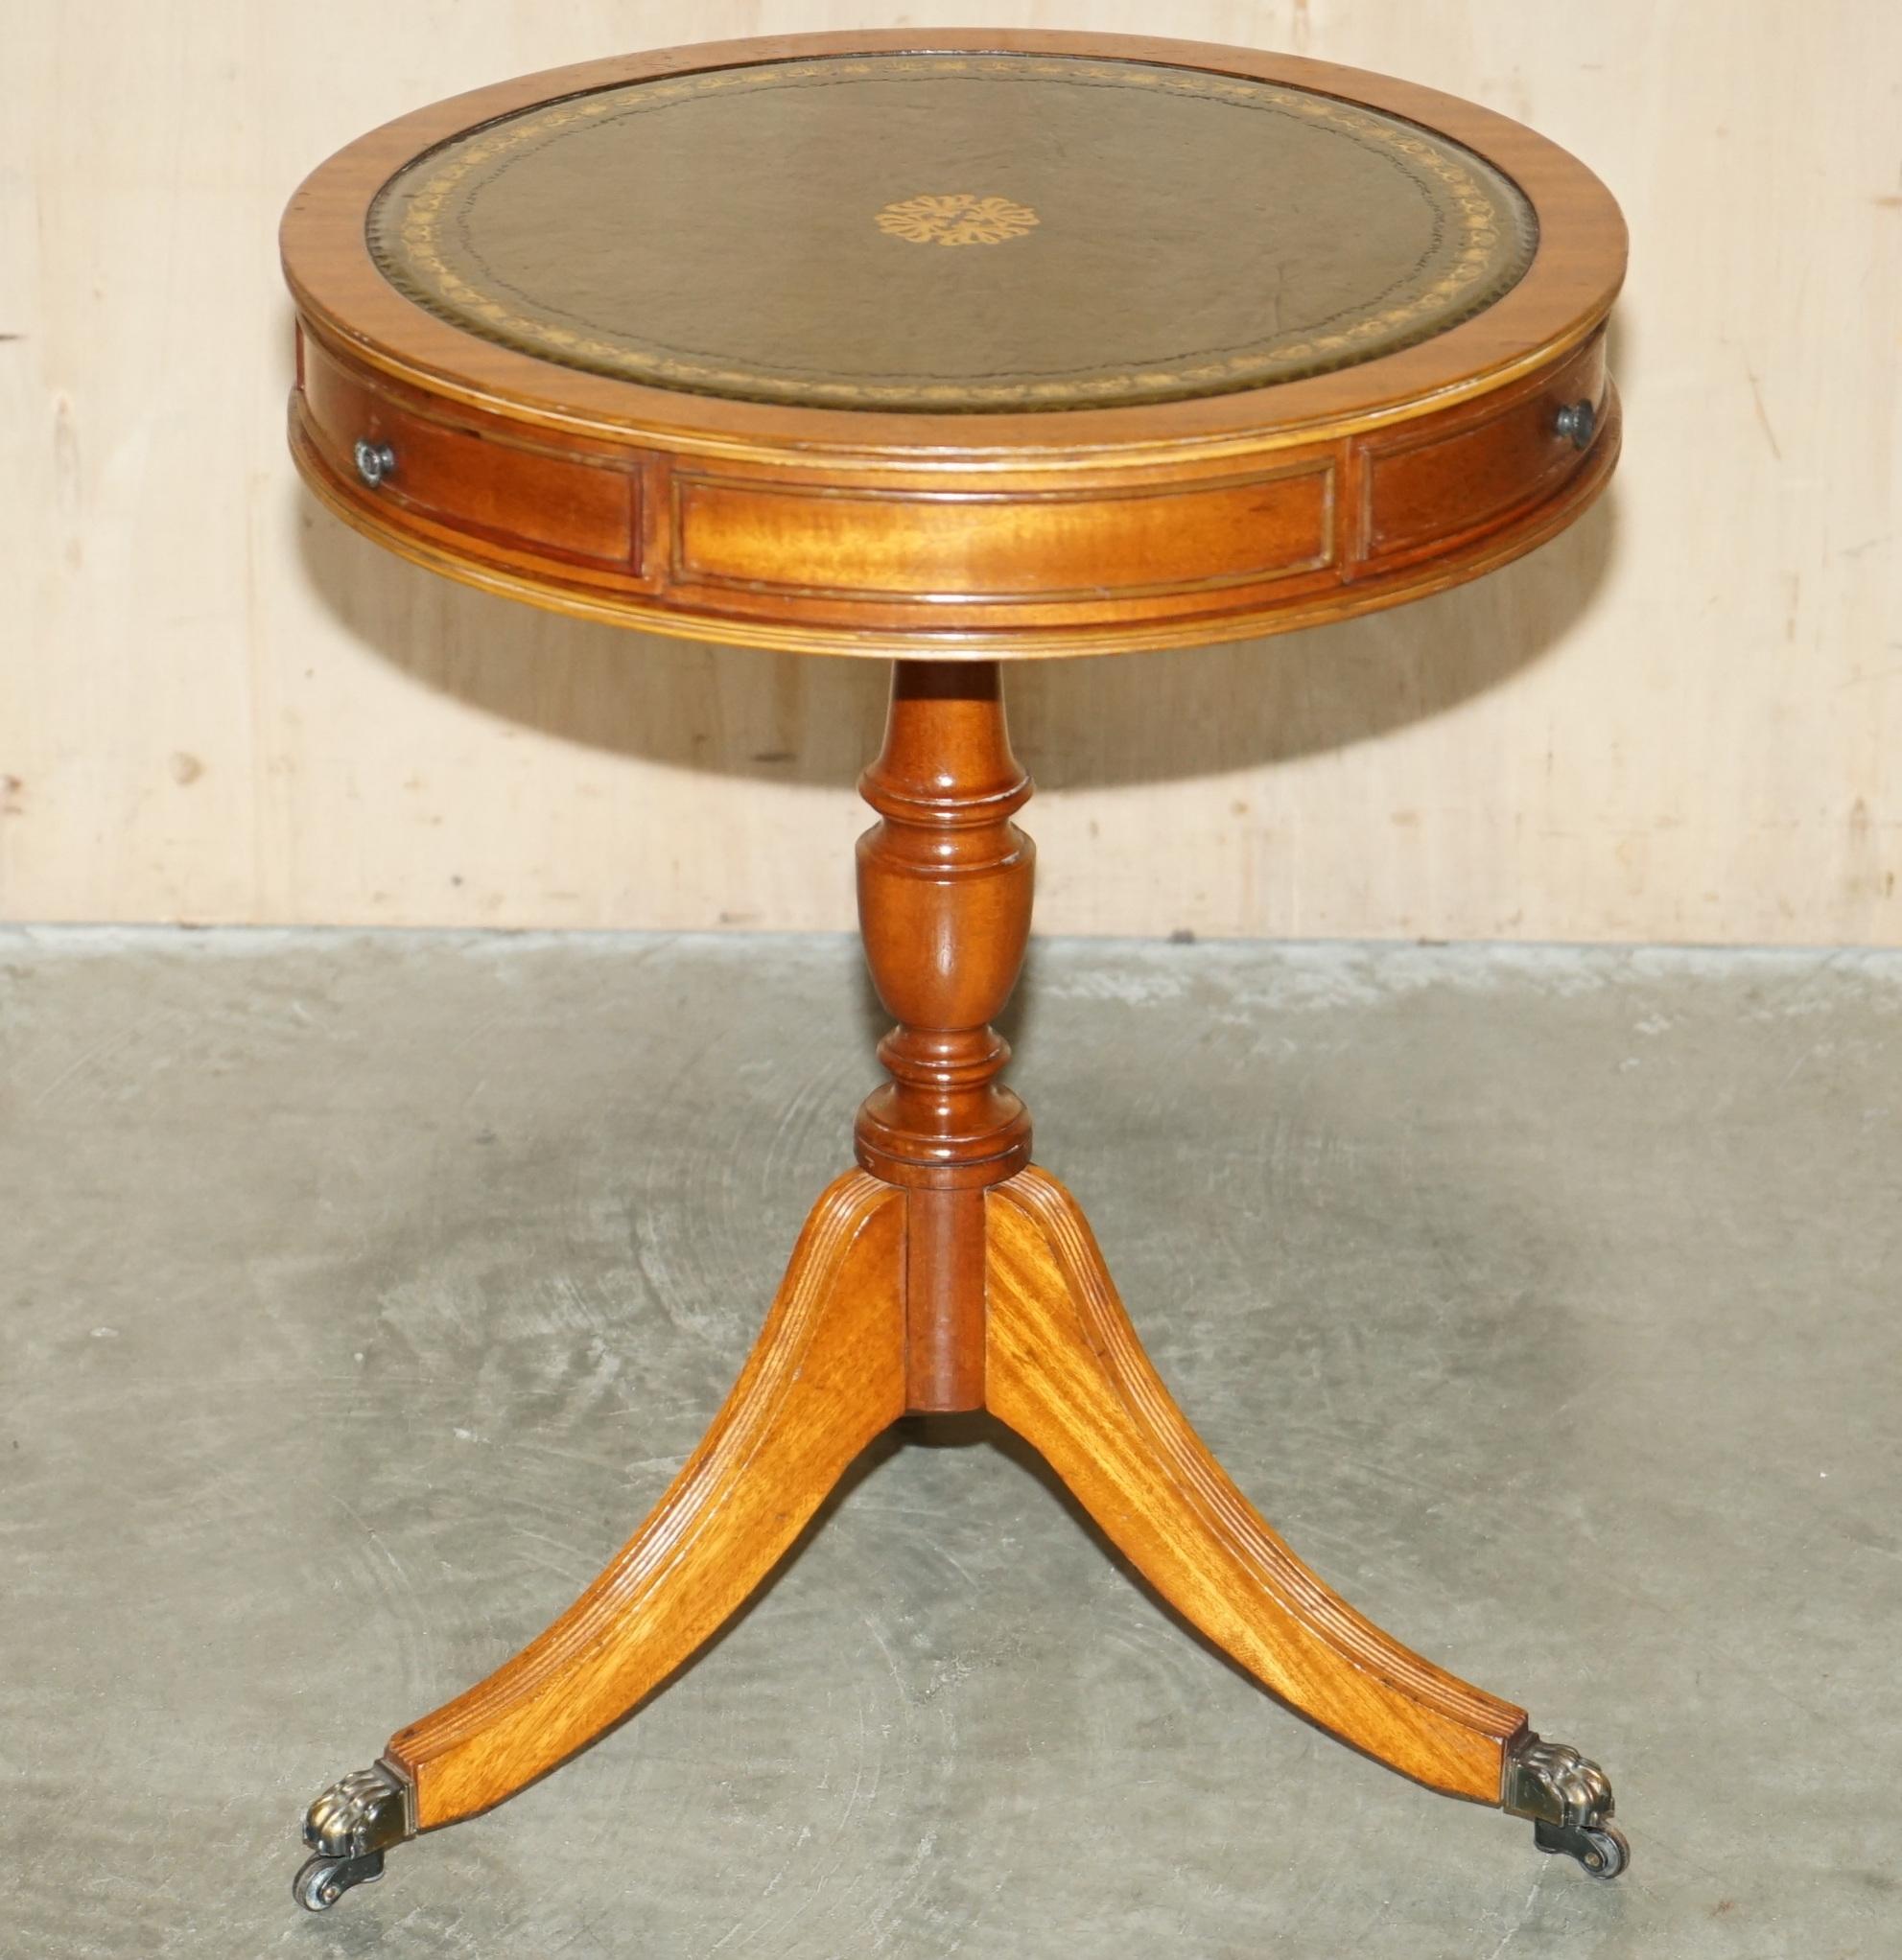 Royal House Antiques

Royal House Antiques is delighted to offer for sale this Regency style drum table with Walnut frame and hand dyed Green leather gold leaf embossed top  

Please note the delivery fee listed is just a guide, it covers within the